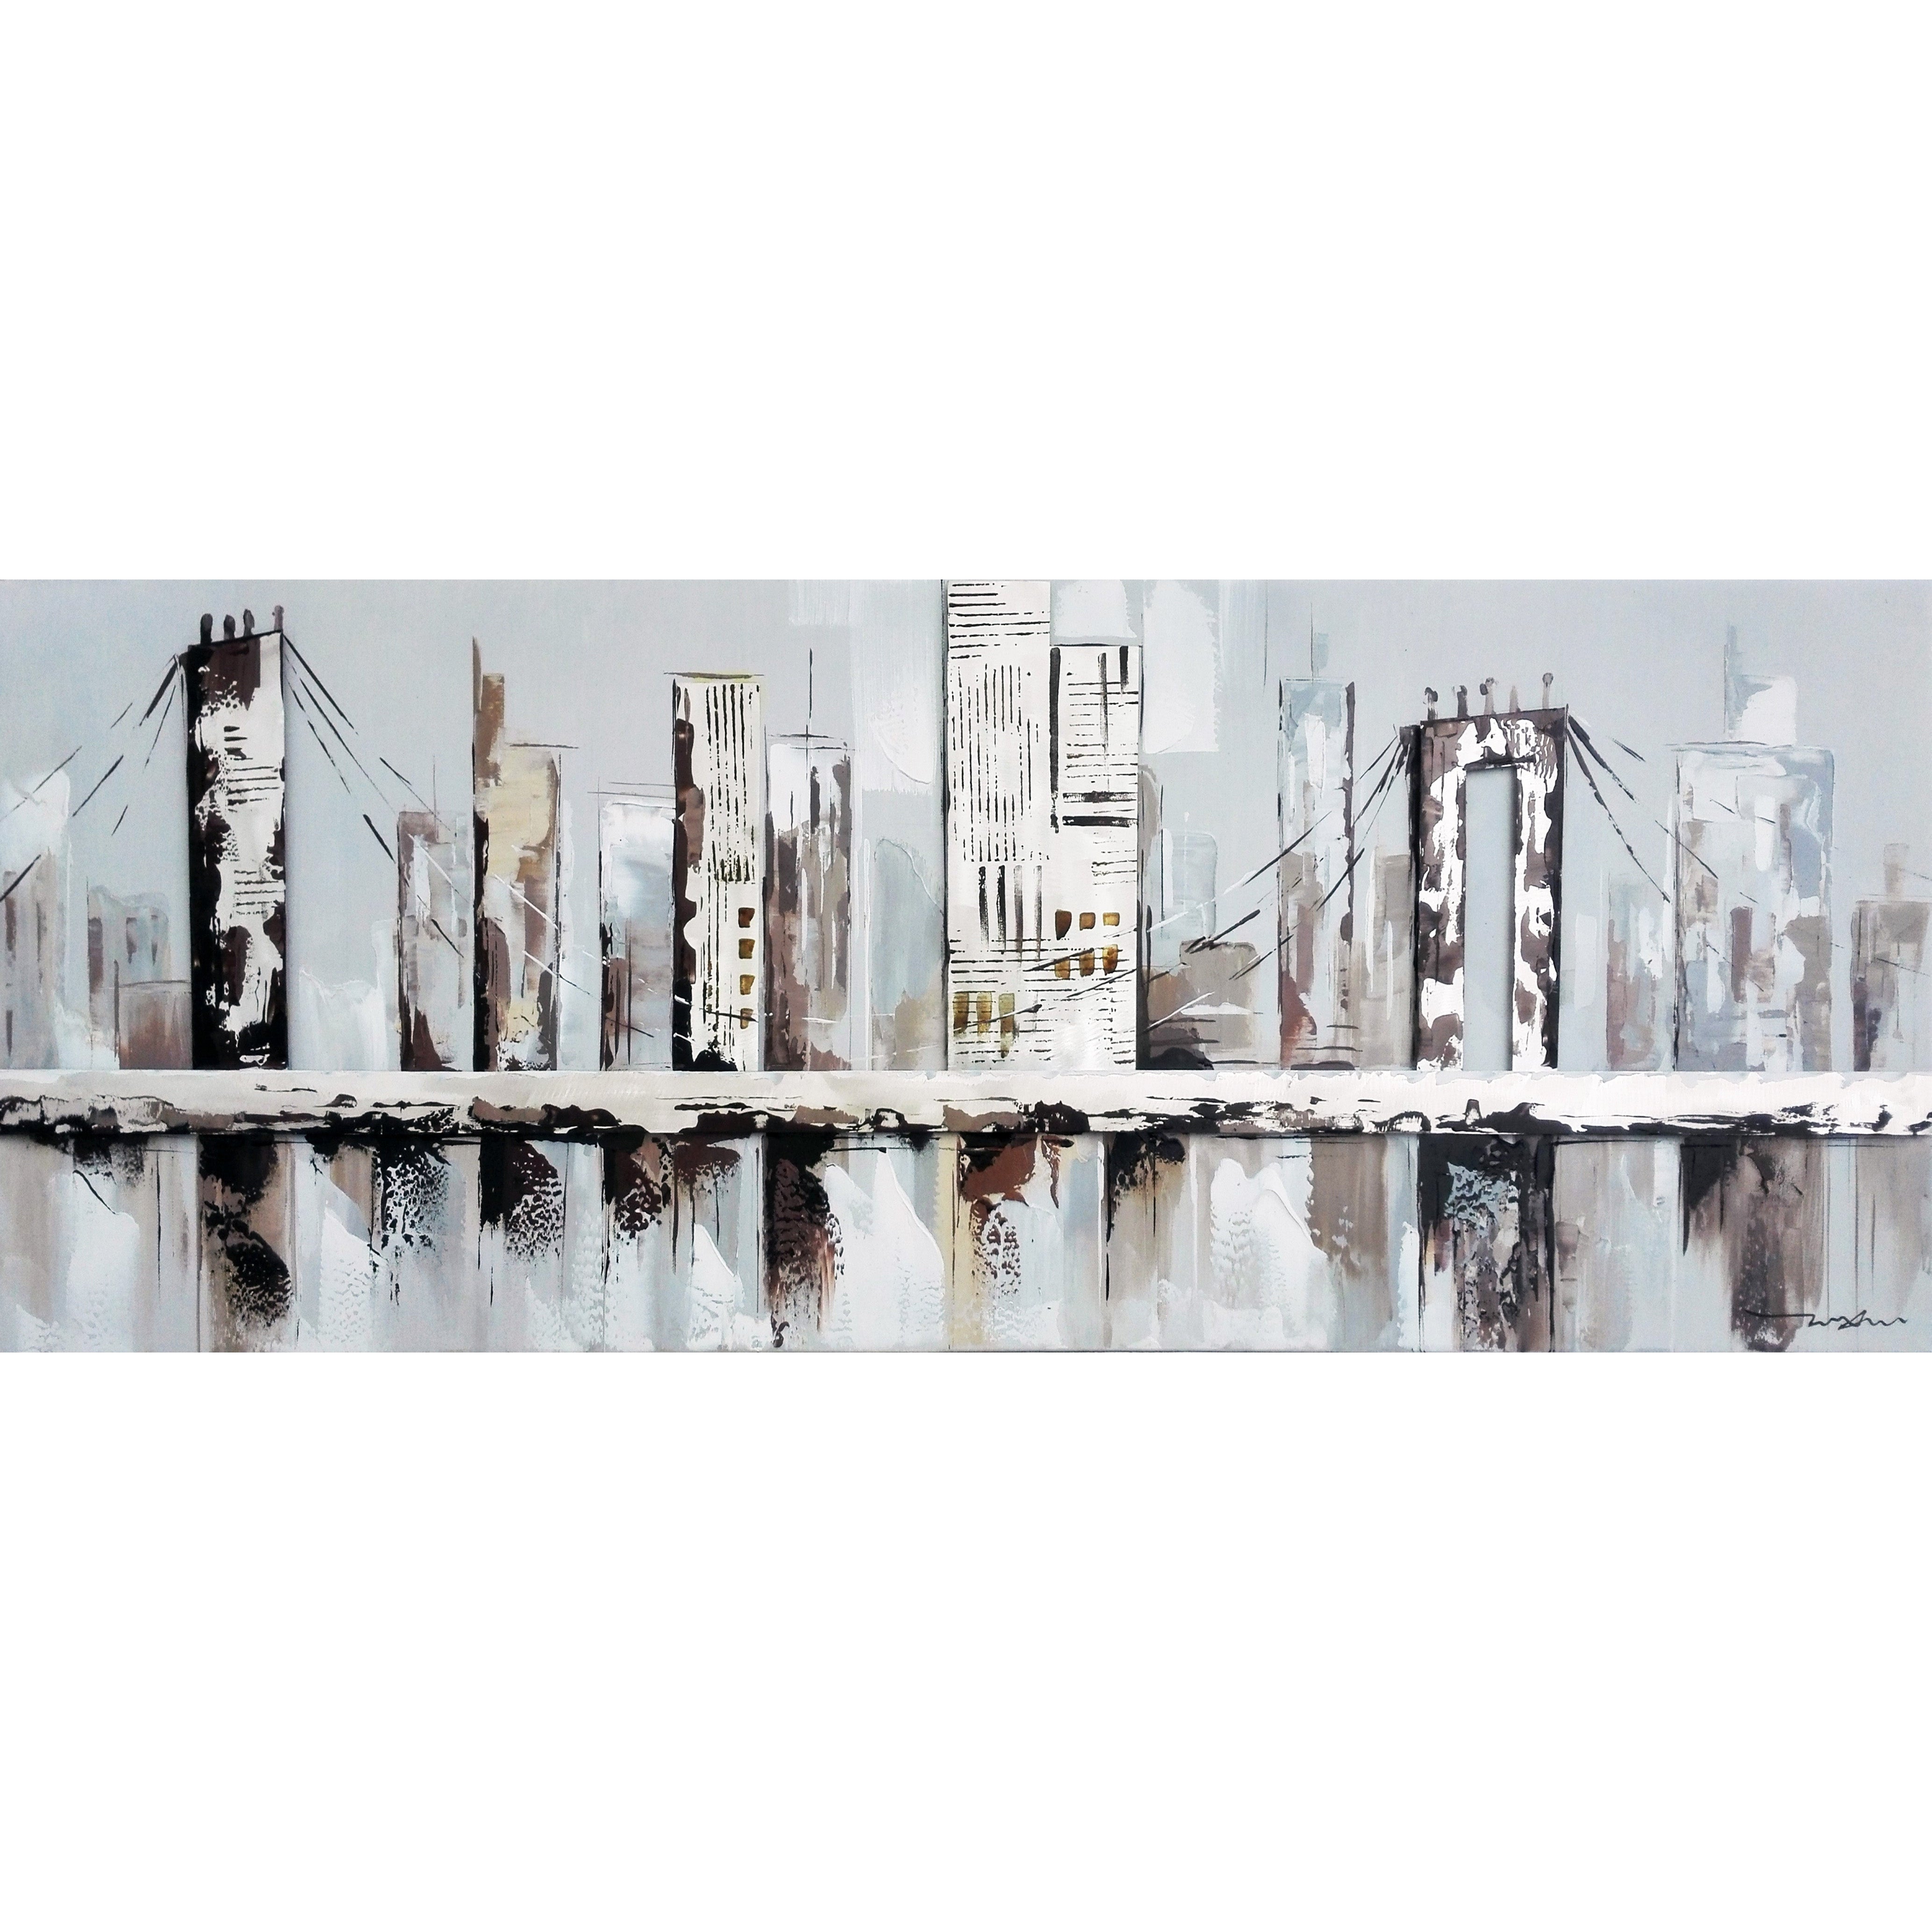 Oil painting | 60x150 cm | Painting | p6071